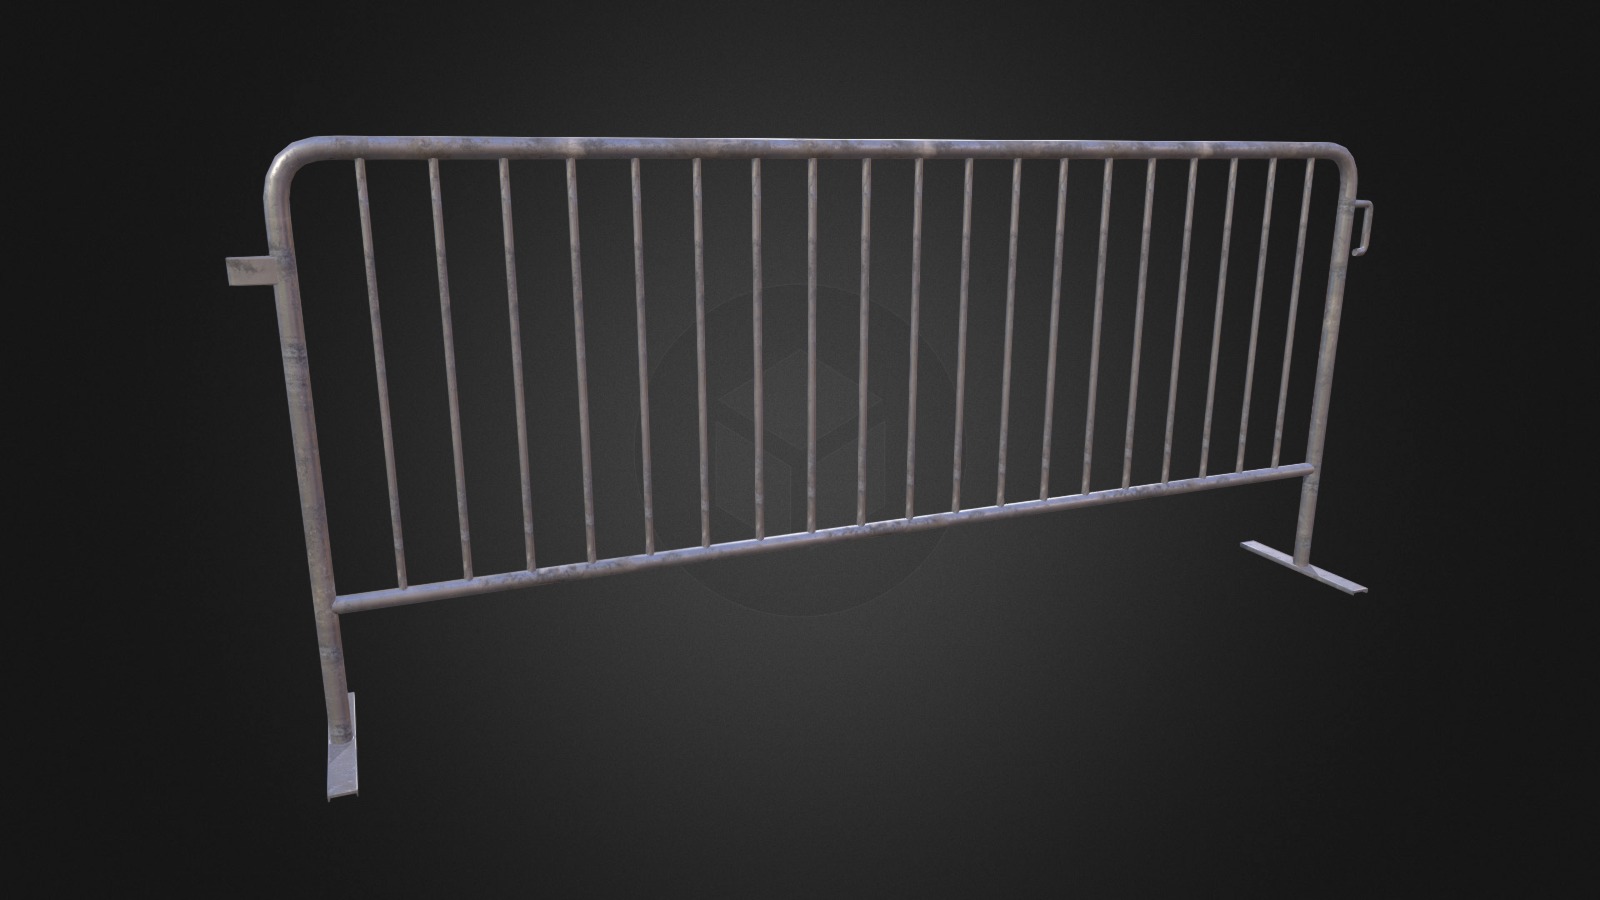 Crowd Barrier for my Unreal Engine 4 collection.
- Verts: 567
- Tris: 838

Textures:
2048x2048 (Albedo, Normal, Roughness, Metallic) - Crowd Barrier v1_1 - 3D model by Longjing 3d model